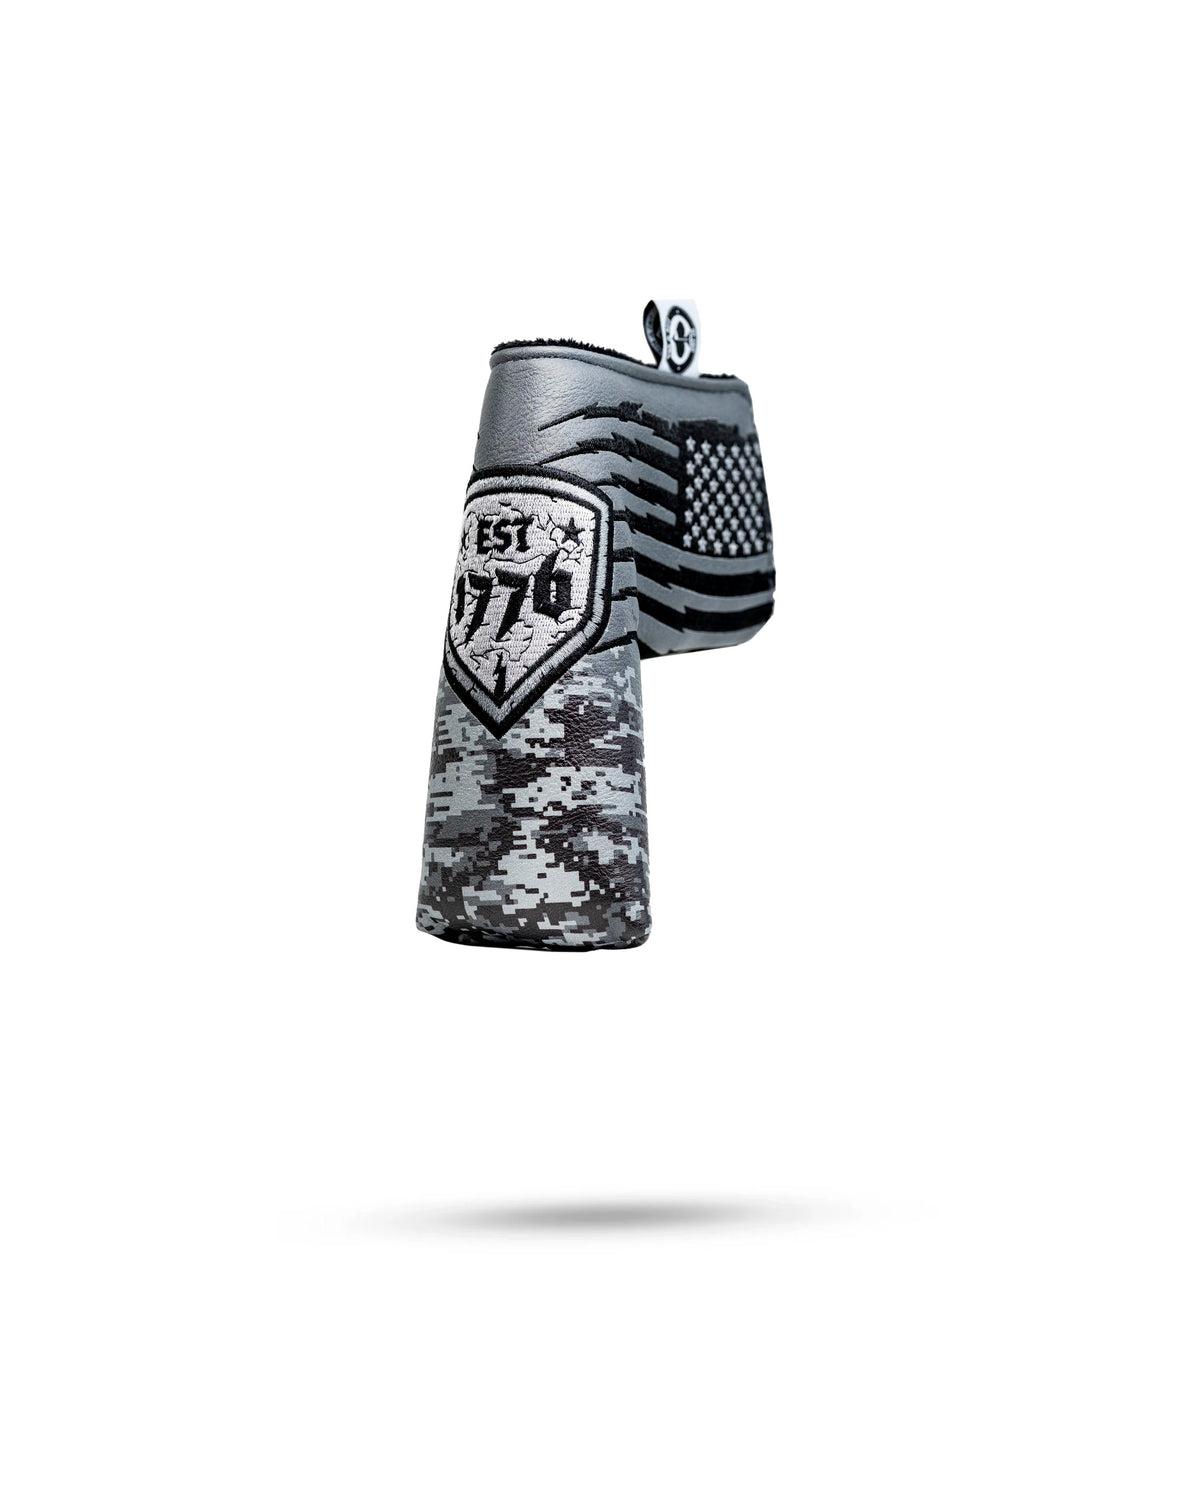 1776 - Blade Putter Cover